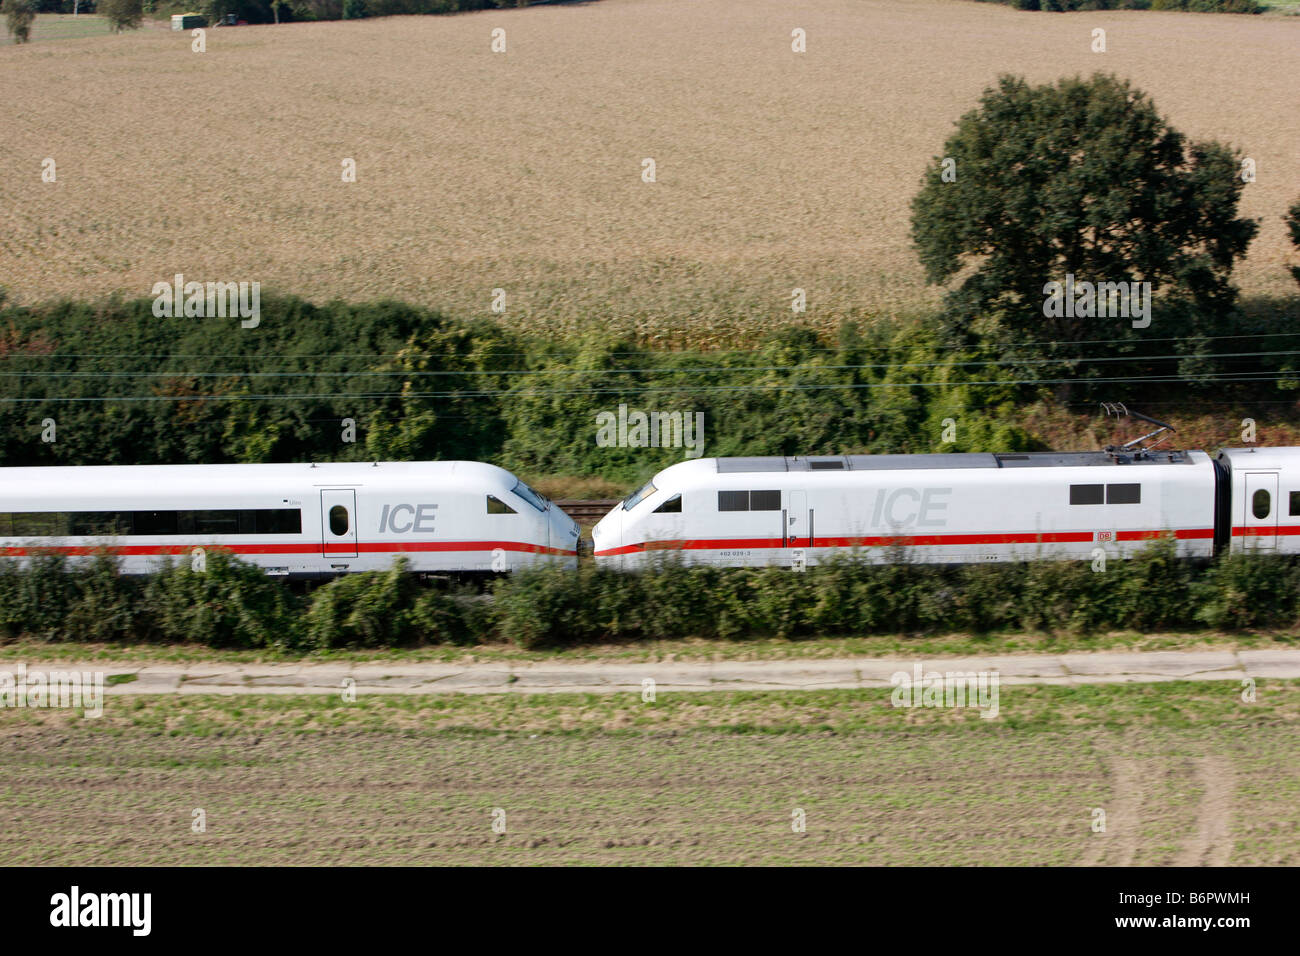 Intercity Express ICE 2 between Hamm and Munster, Germany Stock Photo